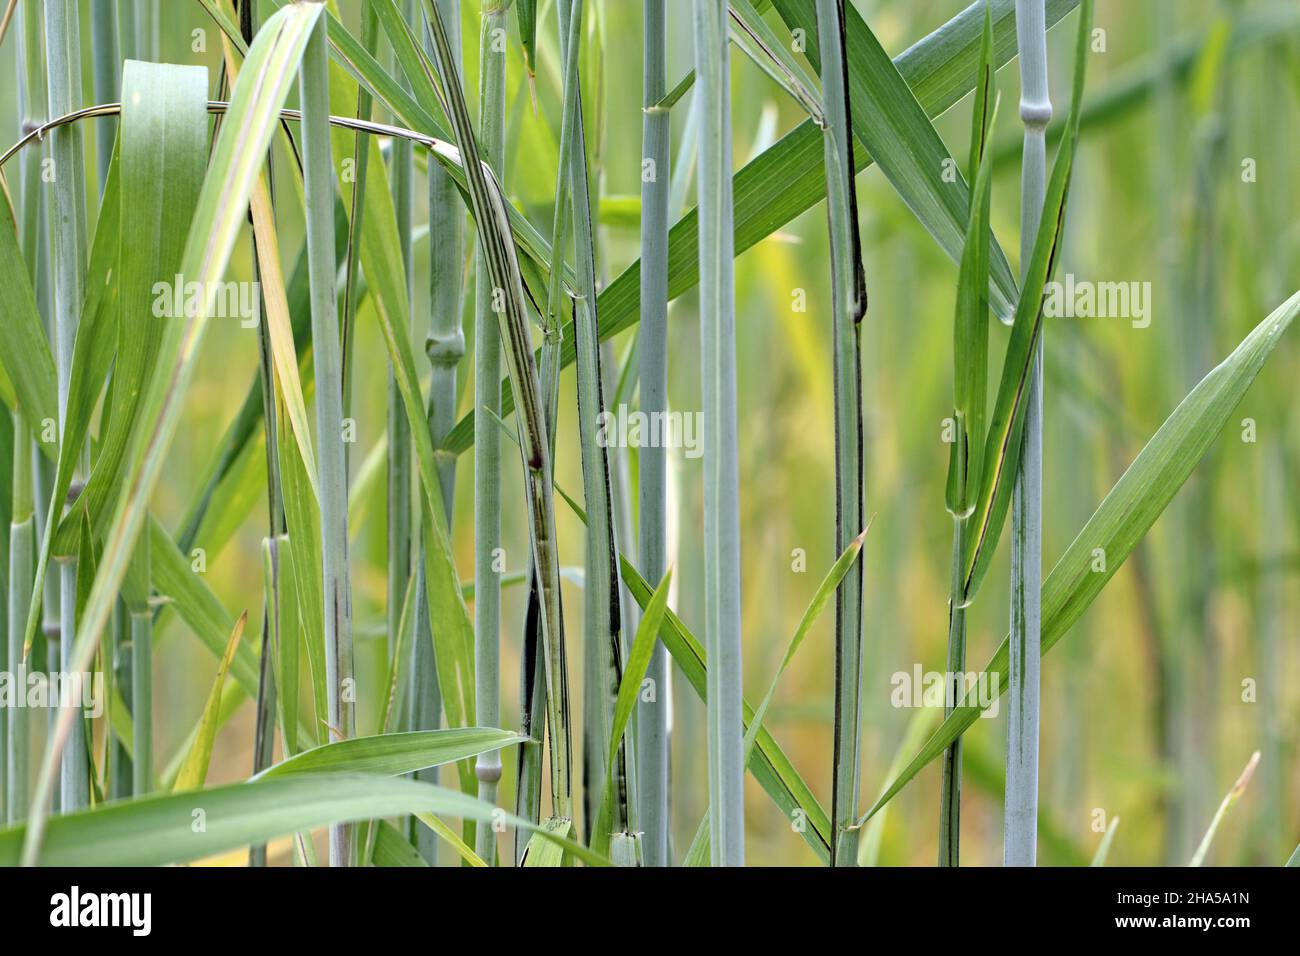 Flag, stalk or stripe smut of rye it is disease caused by the fungus Urocystis occulta which attacks the leaves and stalks of rye (Secale cereale). Stock Photo